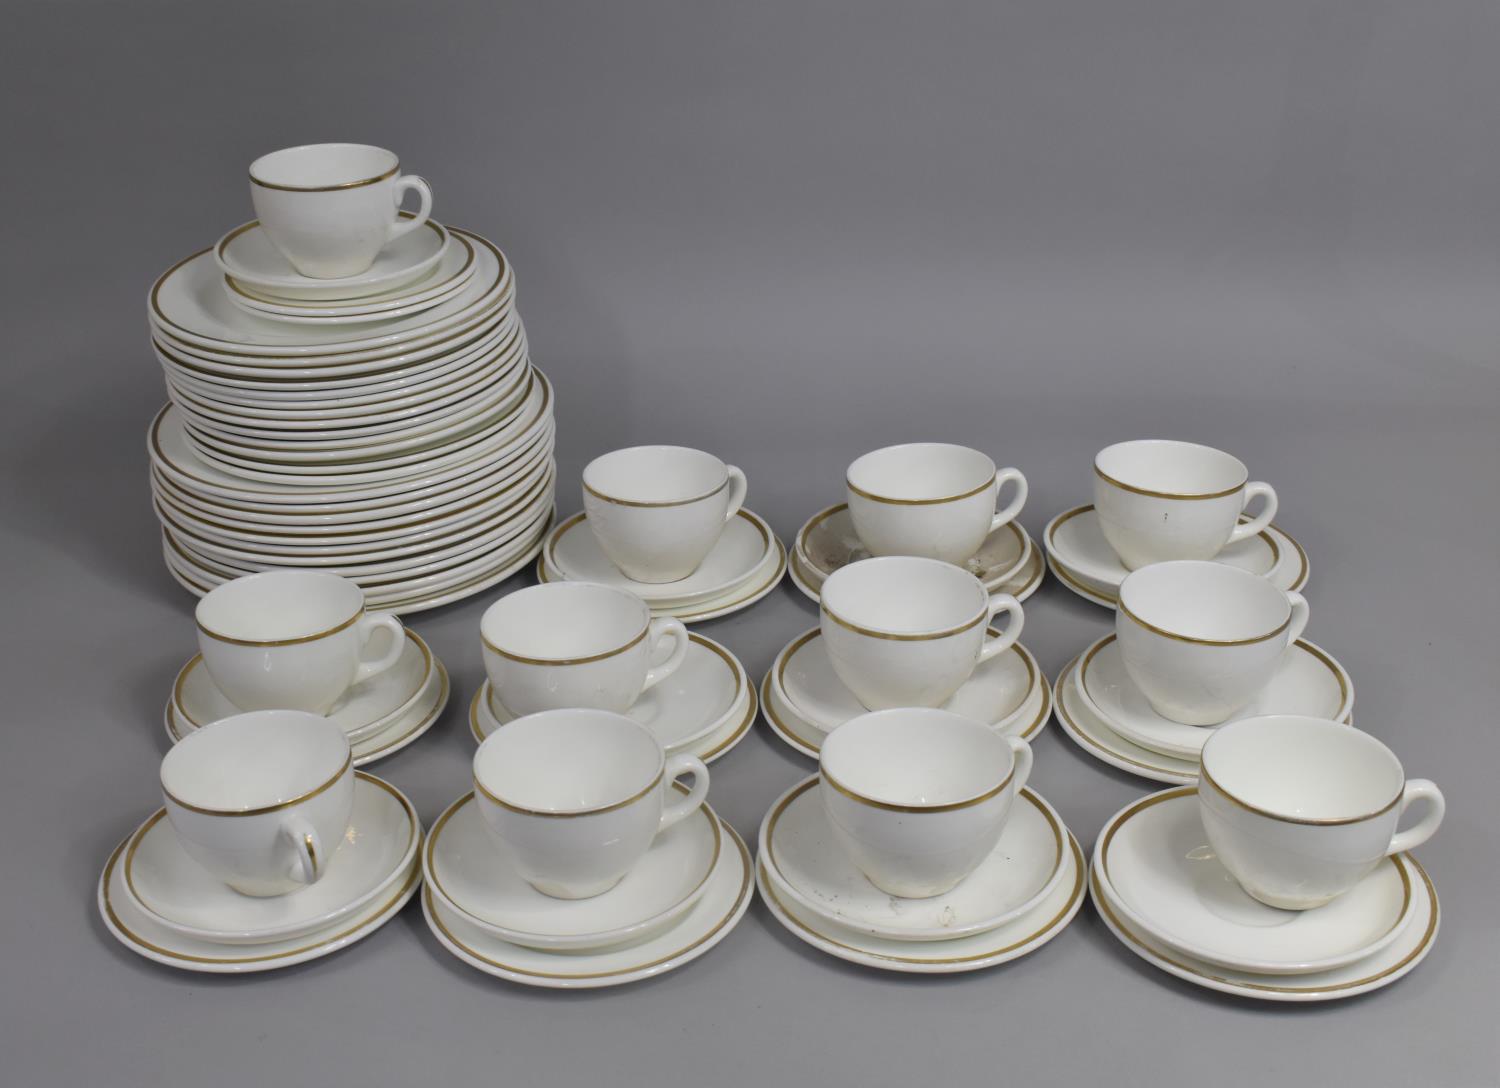 A Wedgwood Gilt Trim and White Service to comprise Dinner Plates, Saucers, Side Plates, Cups Etc